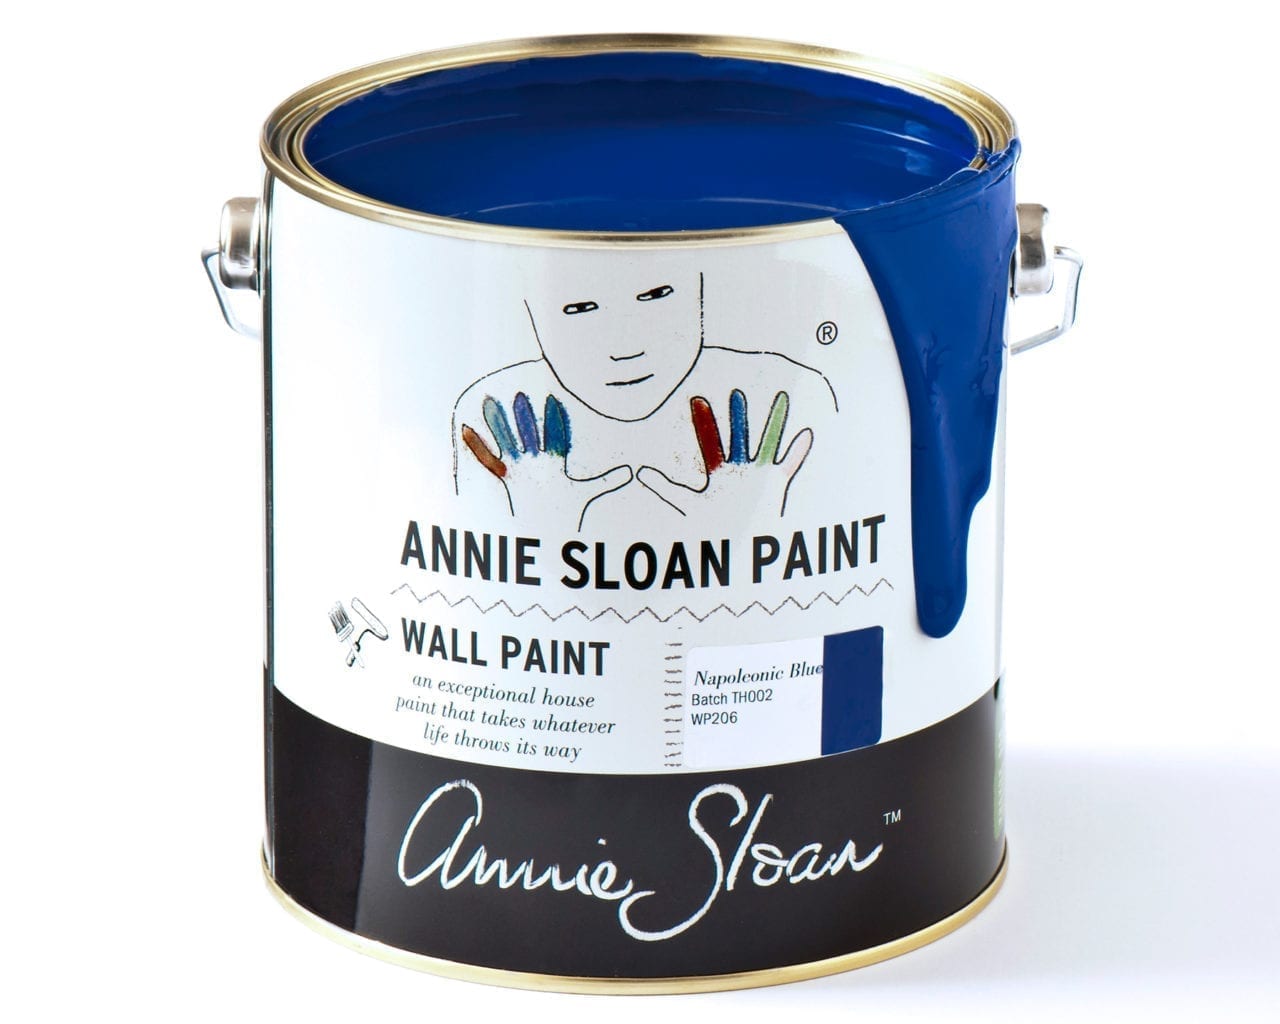 2.5 litre tin of Wall Paint by Annie Sloan in Napoleonic Blue, a rich deep cobalt blue